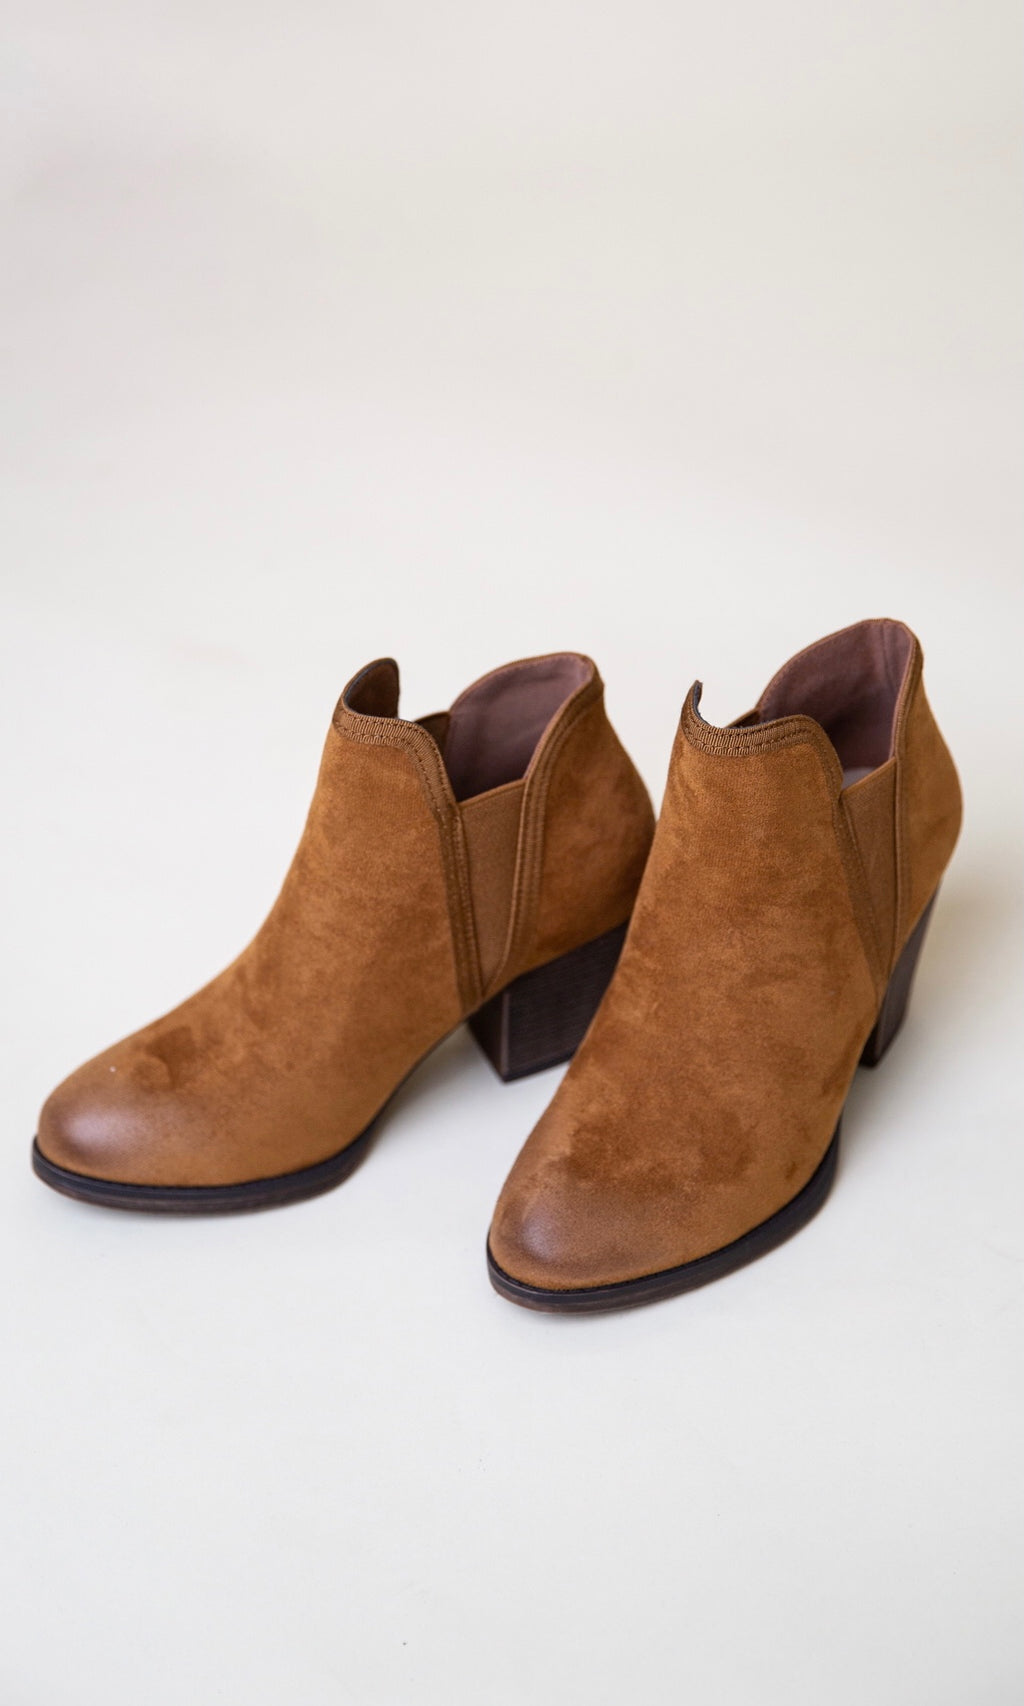 The Ultimate Booties - New Tan